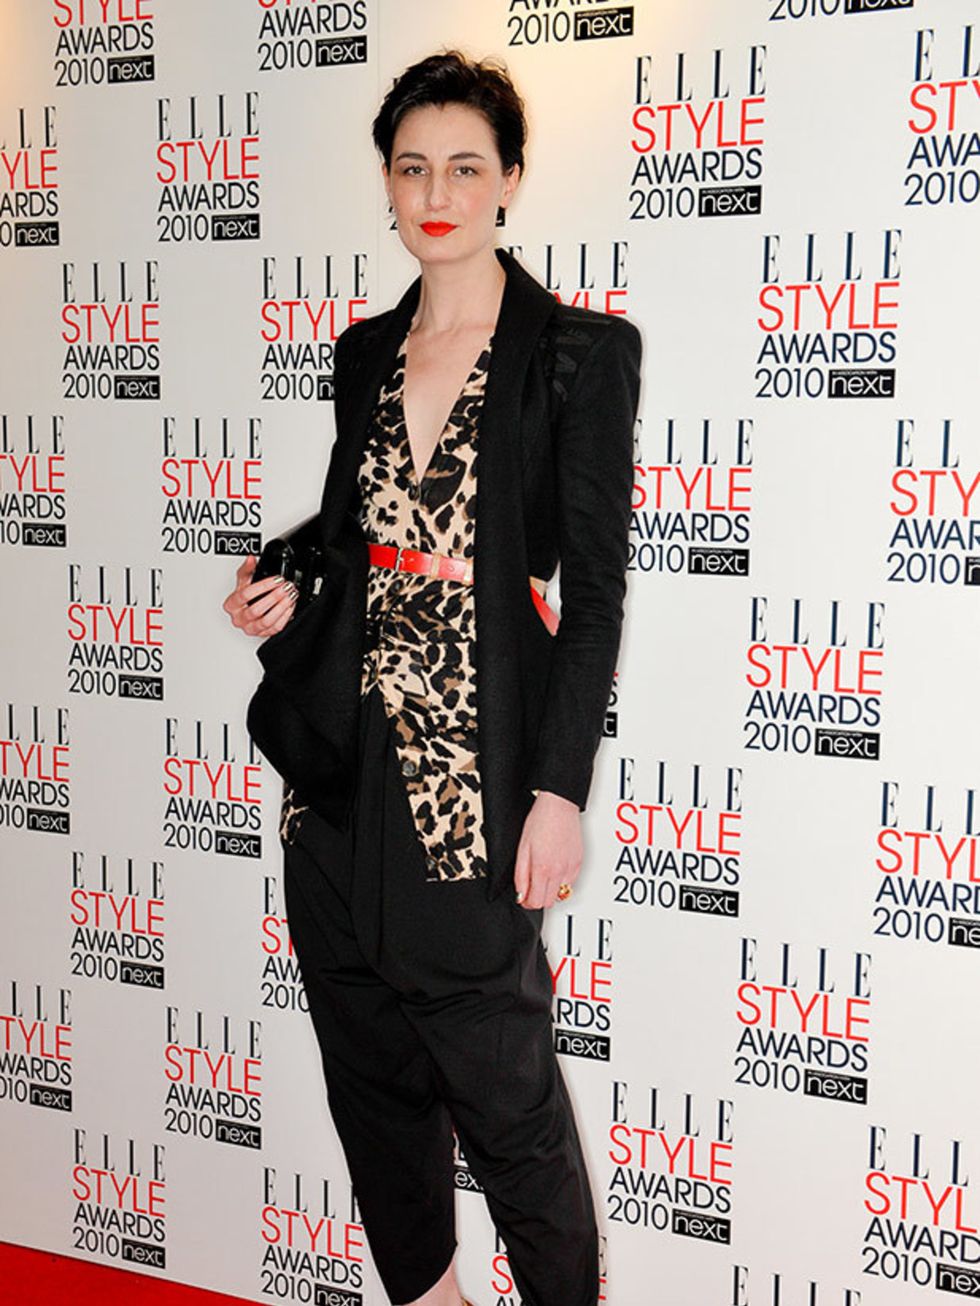 Erin O'Connor at the ELLE Style Awards 2010.